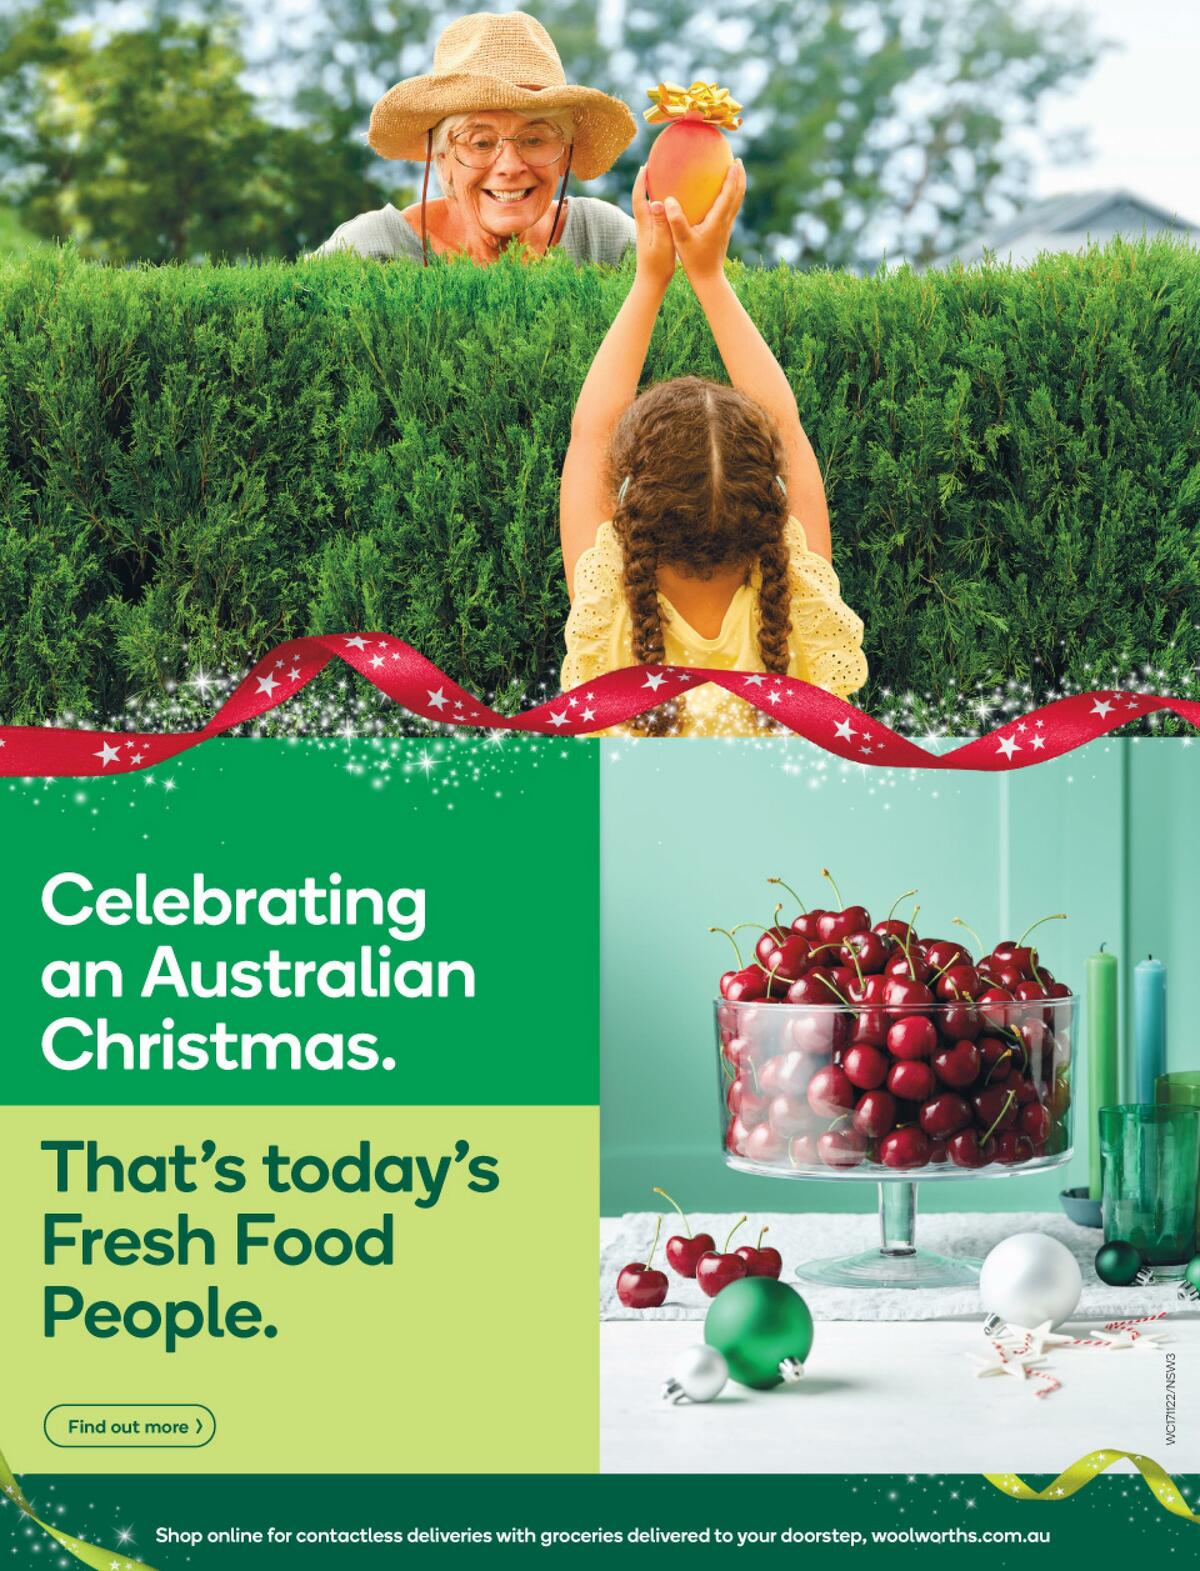 Woolworths Catalogues from 17 November